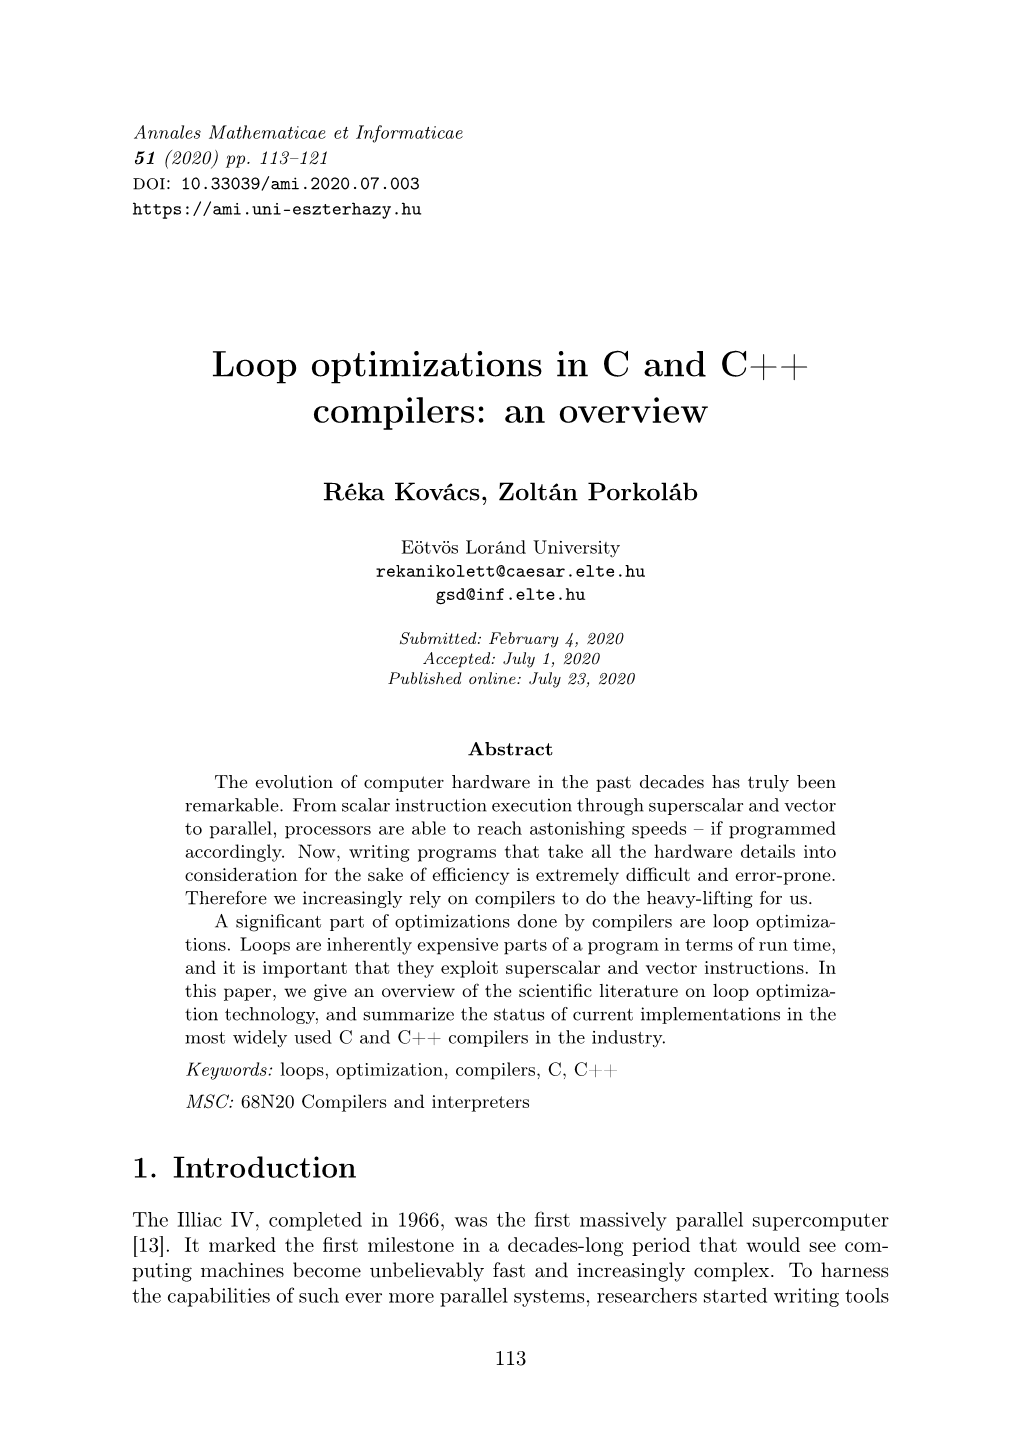 Loop Optimizations in C and C++ Compilers: an Overview